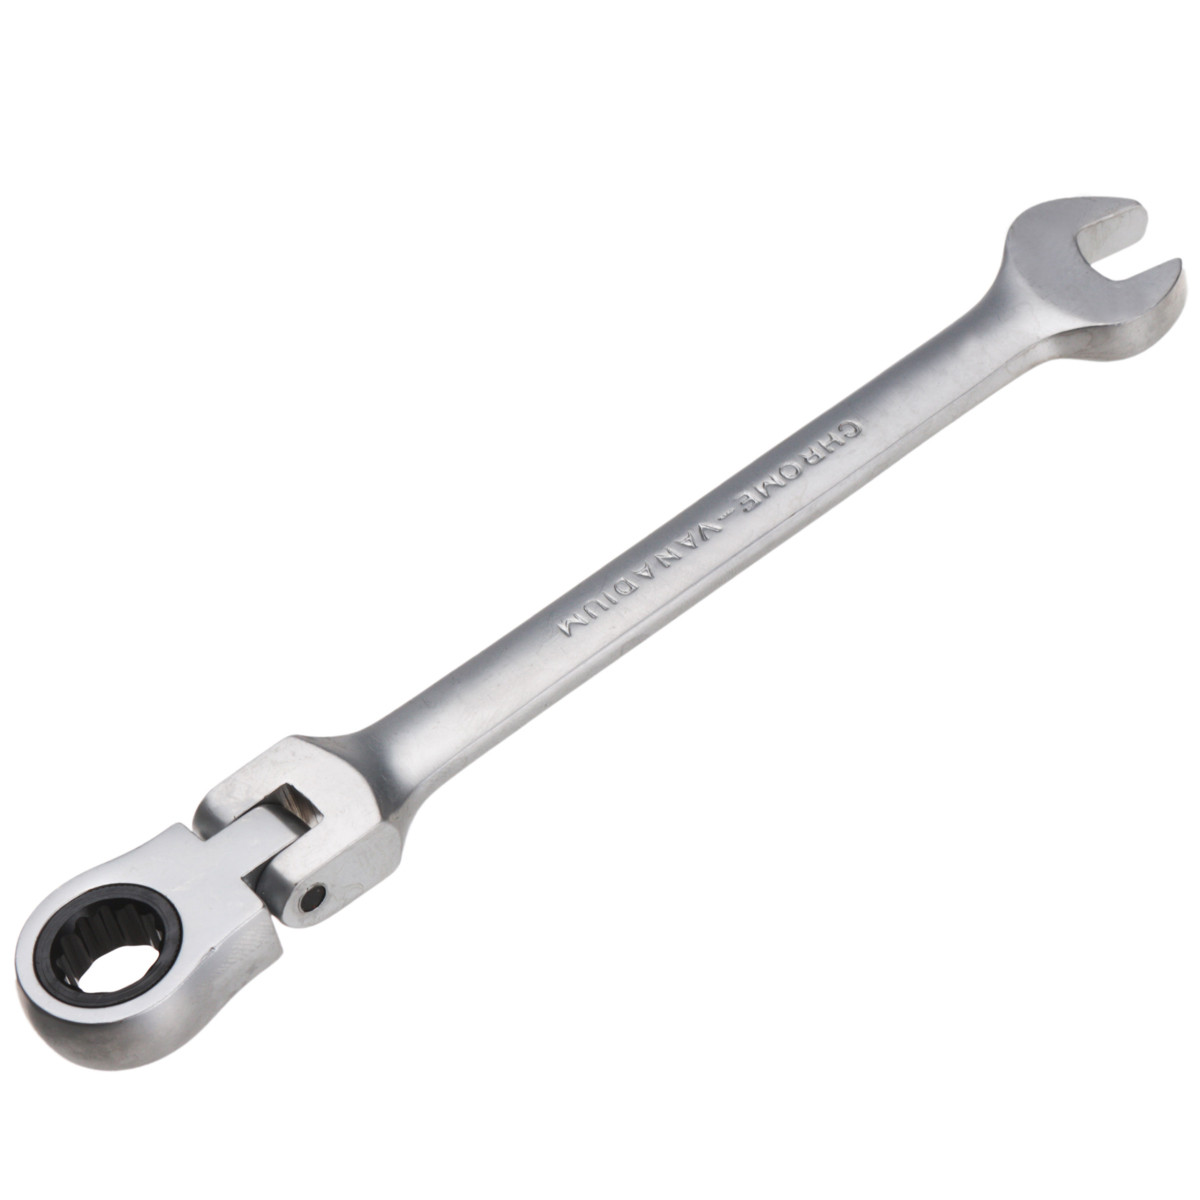 10mm-Flexible-Head-Wrench-Ratchet-Metric-Spanner-Open-End-And-Ring-Wrenches-Tool-979974